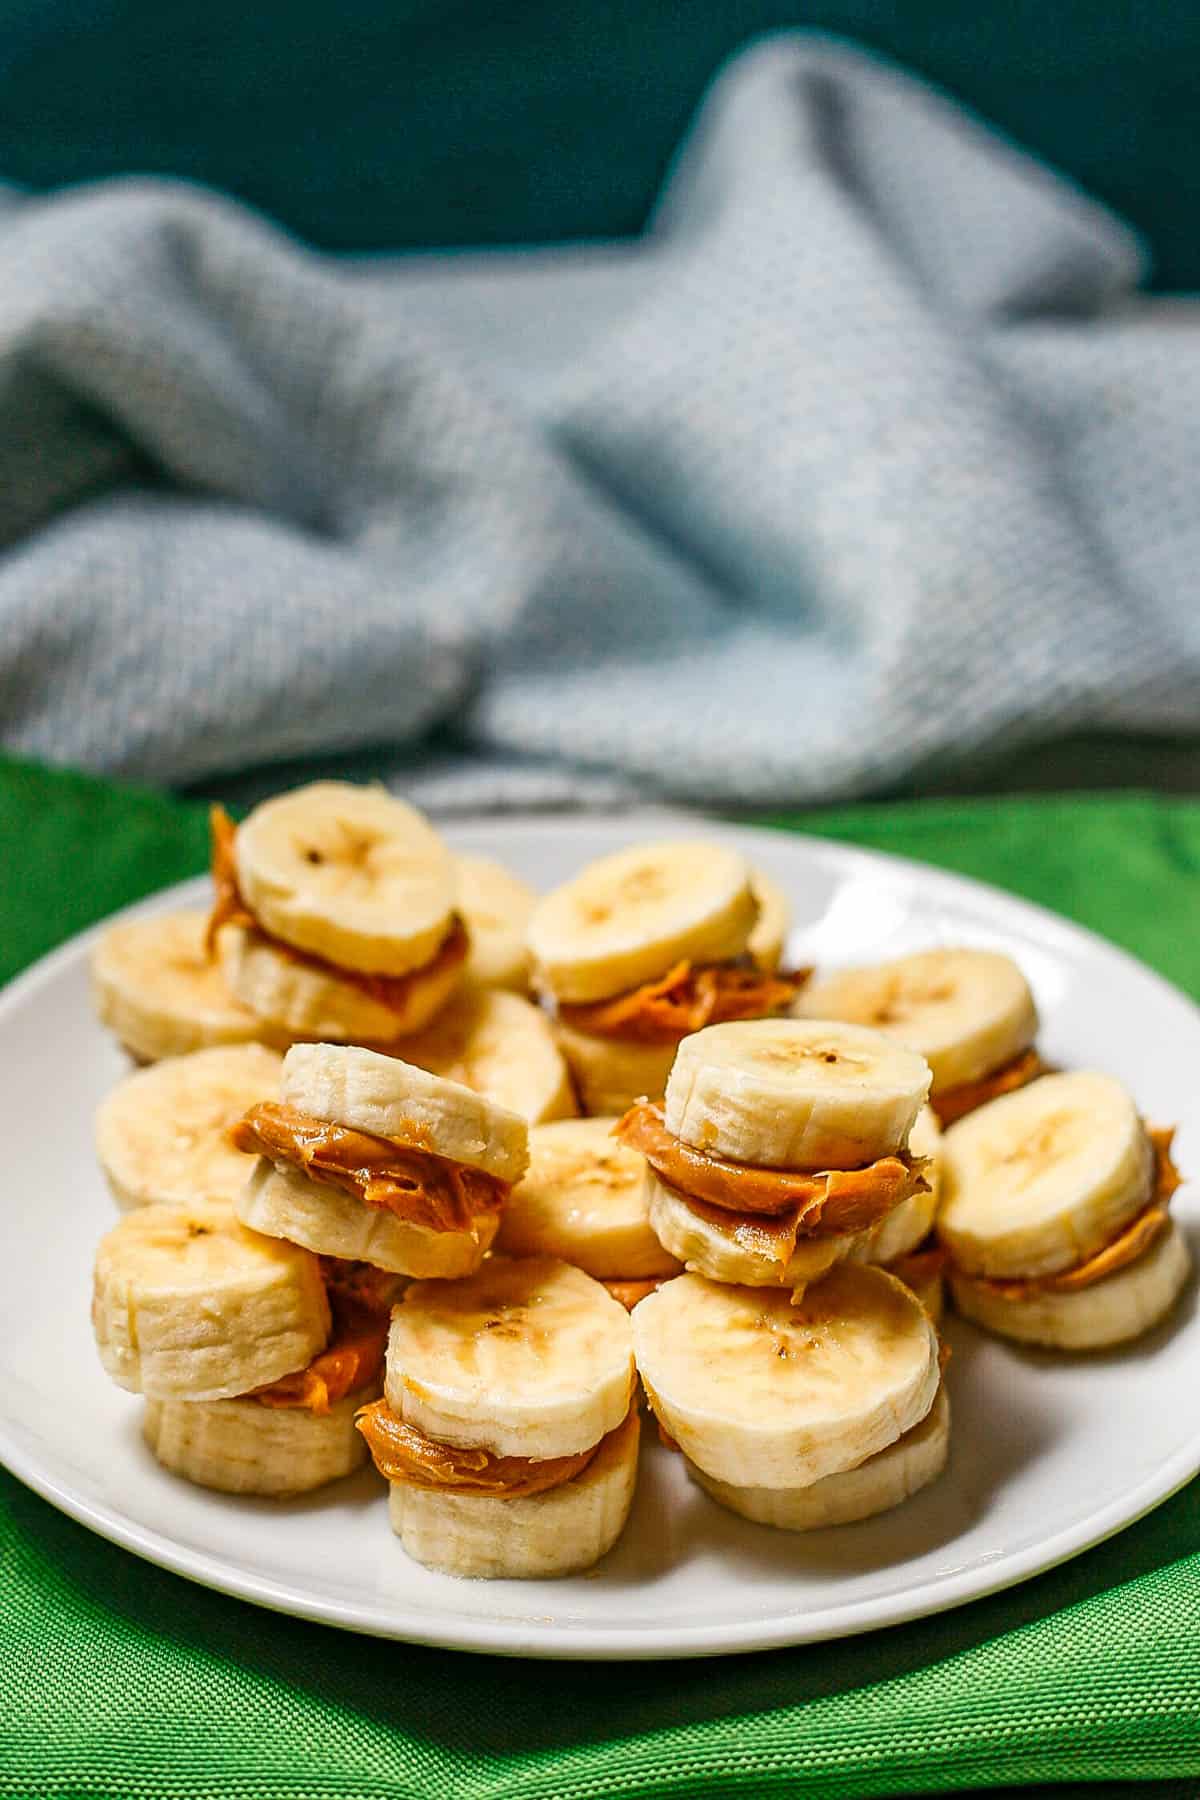 A plate full of sliced bananas stacks with peanut butter sandwiched in the middle.